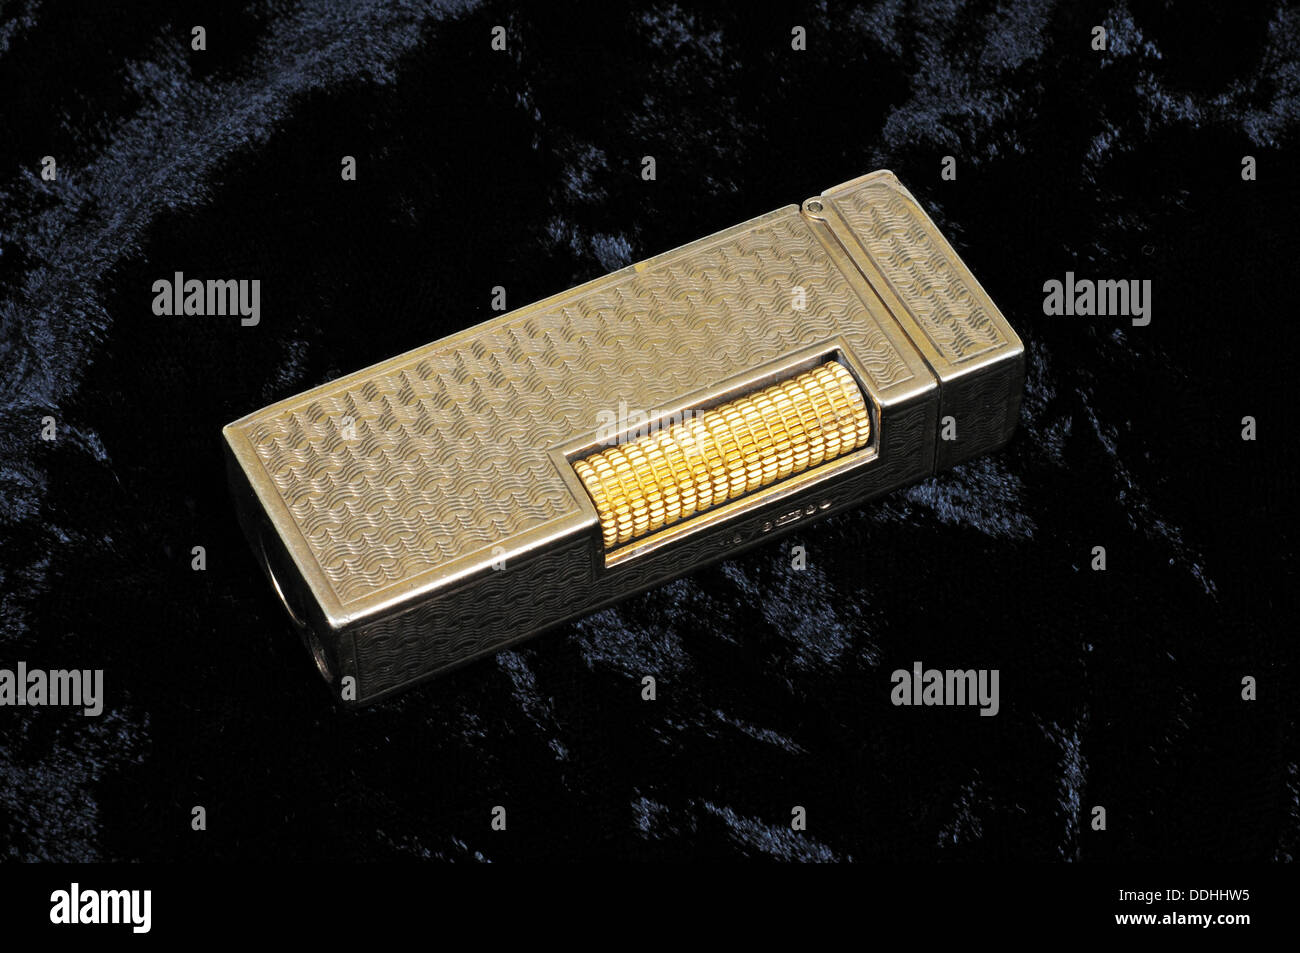 Dunhill gold cigarette lighter against a dark background. Stock Photo